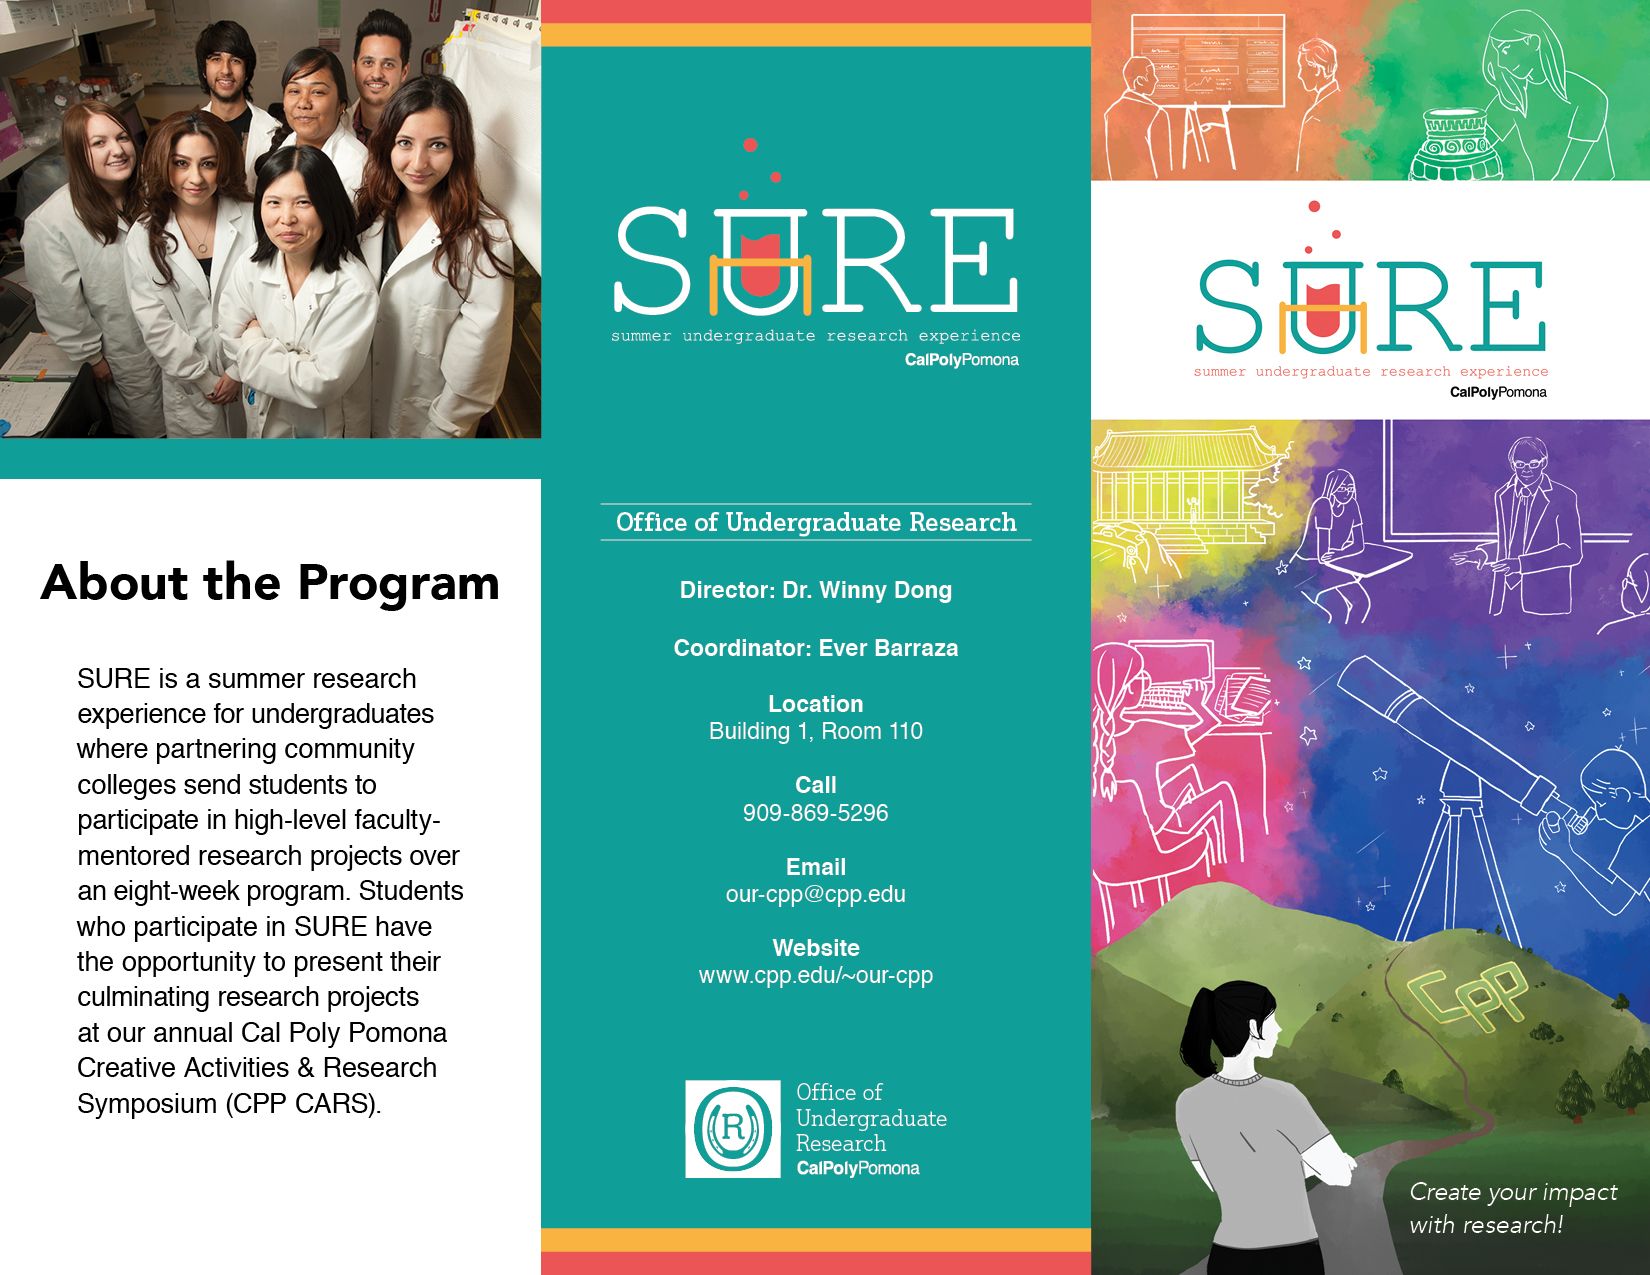 SURE Brochure Outside Page: First Column: About the Program, SURE is a summer research experience for undergraduates where partnering community colleges send students to participate in high-level faculty-mentored research projects over an eight-week program. Students who participate in SURE have the opportunity to present their culminating research projects at our annual Cal Poly Pomona Creative Activities & Research Symposium (CPP CARS). Second column: Office information: Office of Undergraduate Research, Director: Dr. Winny Dong, Coordinator: Ever Barraza, Location: Building 1, Room 110, Phone number: 909-869-5296, E-mail: our-cpp@cpp.edu